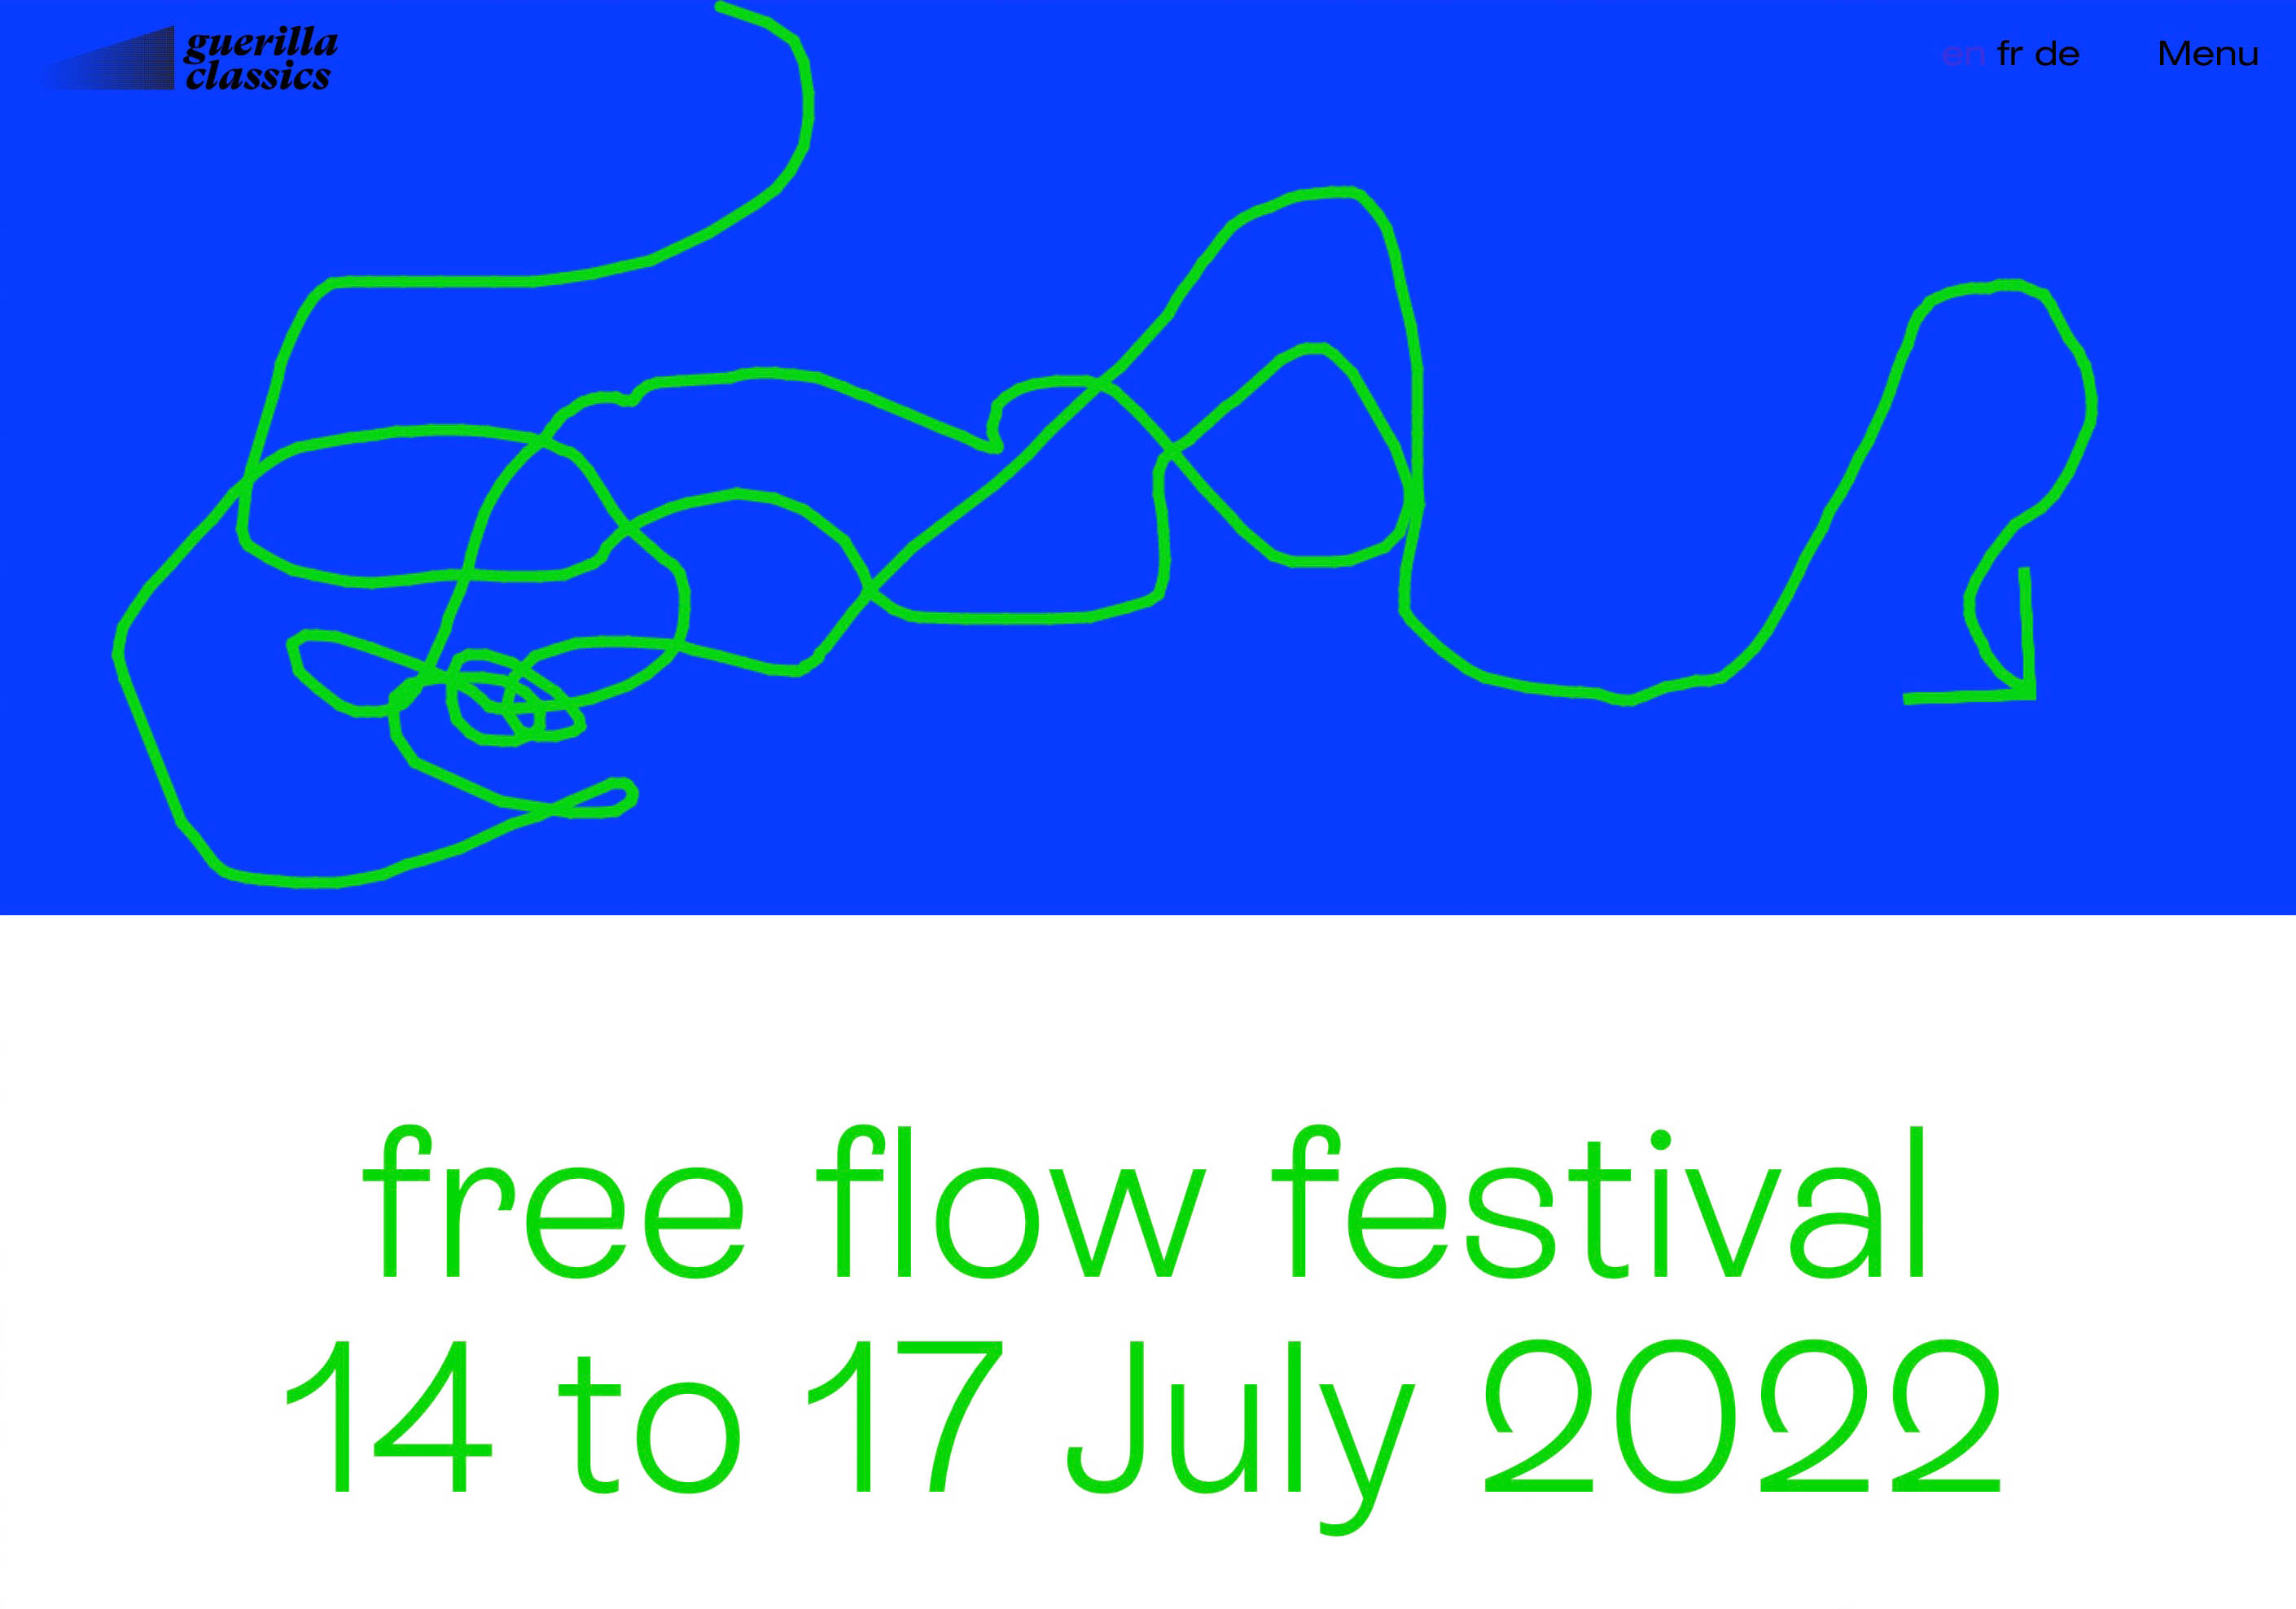 free flow festival 2022 – guerillaclassics – code and cms